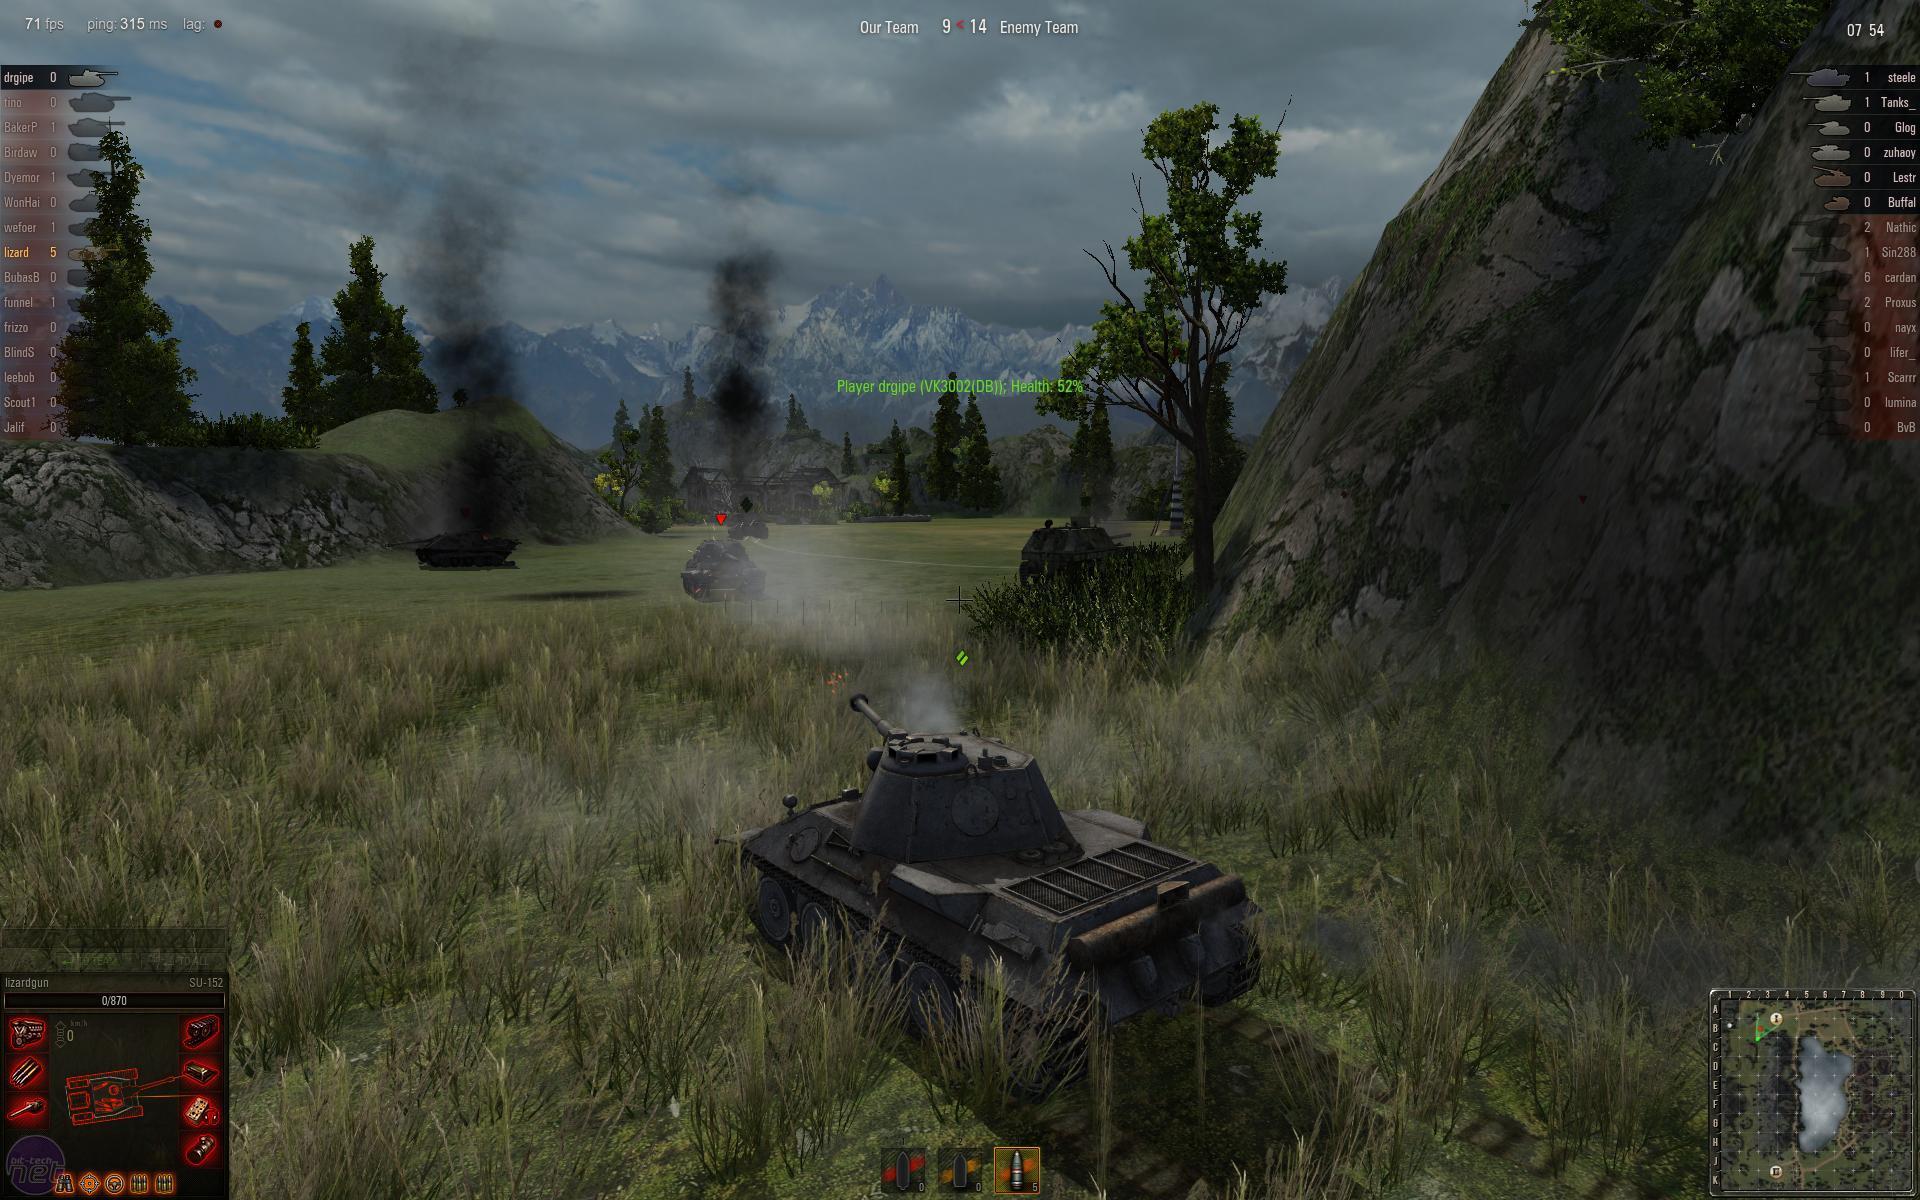 A picture of World of Tanks